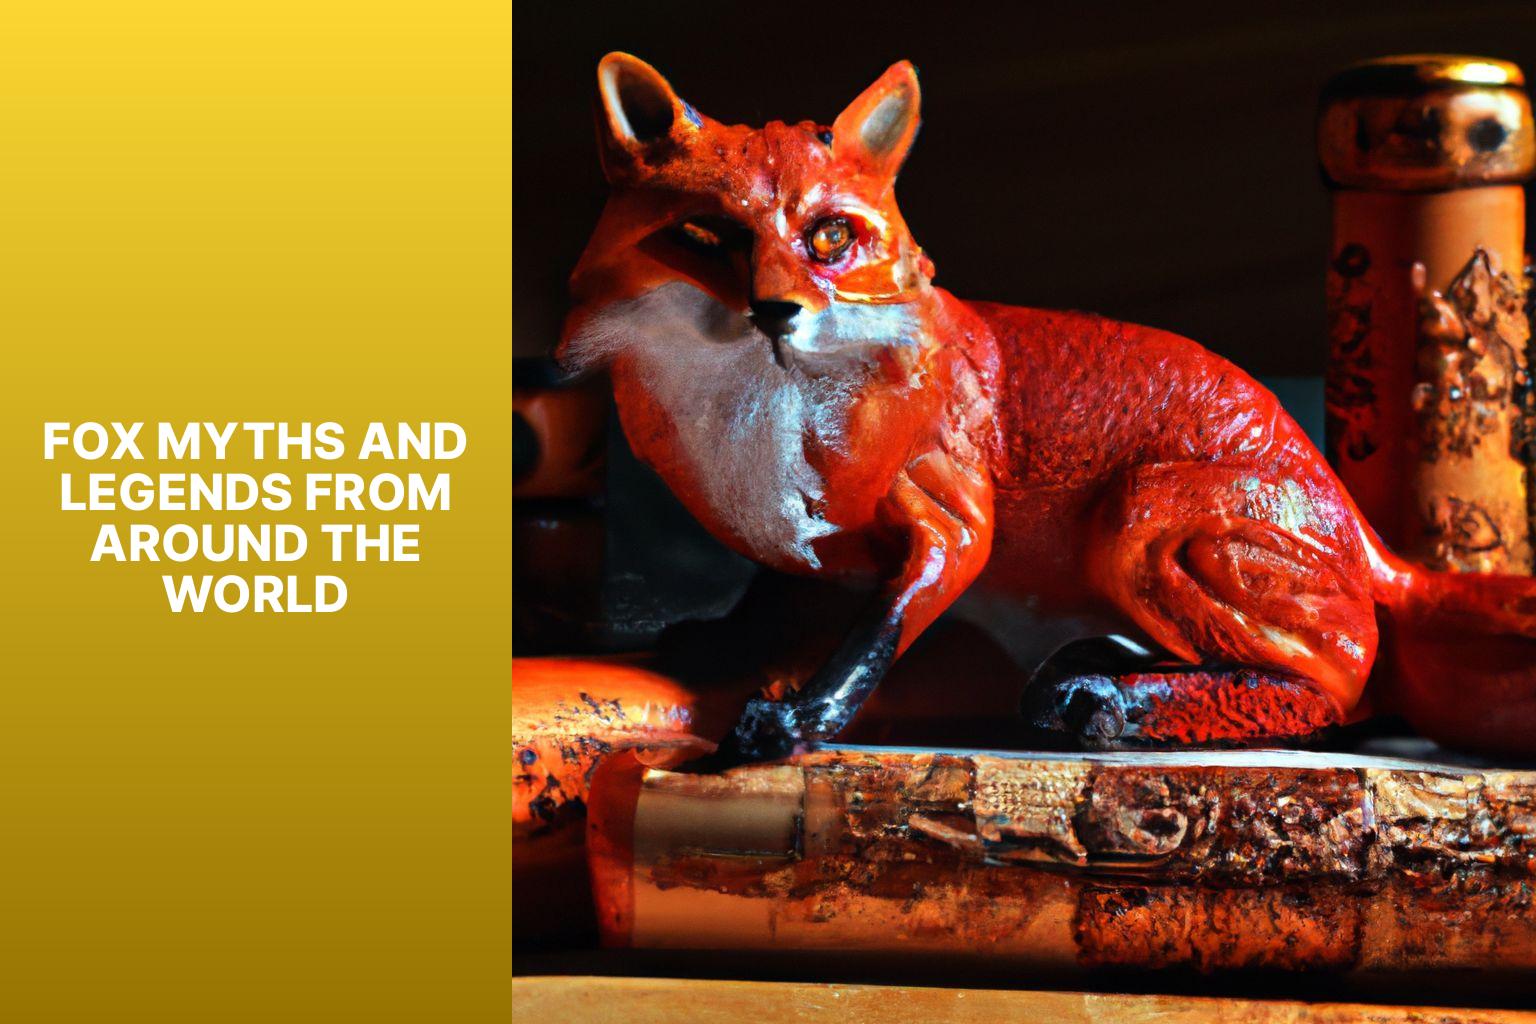 Fox Myths and Legends from Around the World - Fox Myths in Animal Guides 